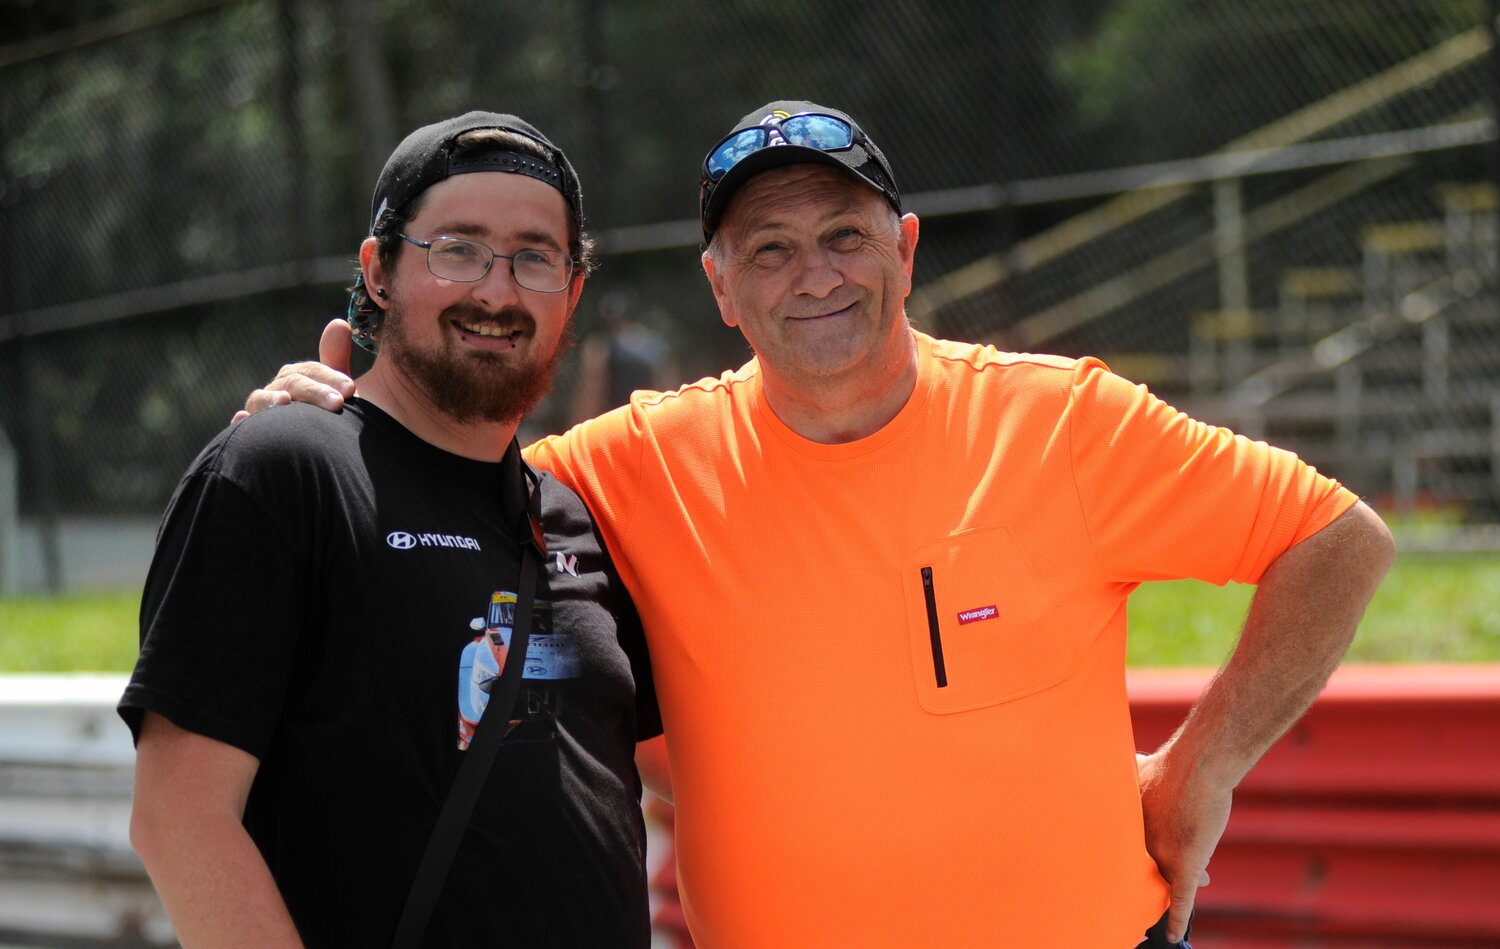 Movers and shakers: Track photographer William Smith and car show announcer Ric Ryder.